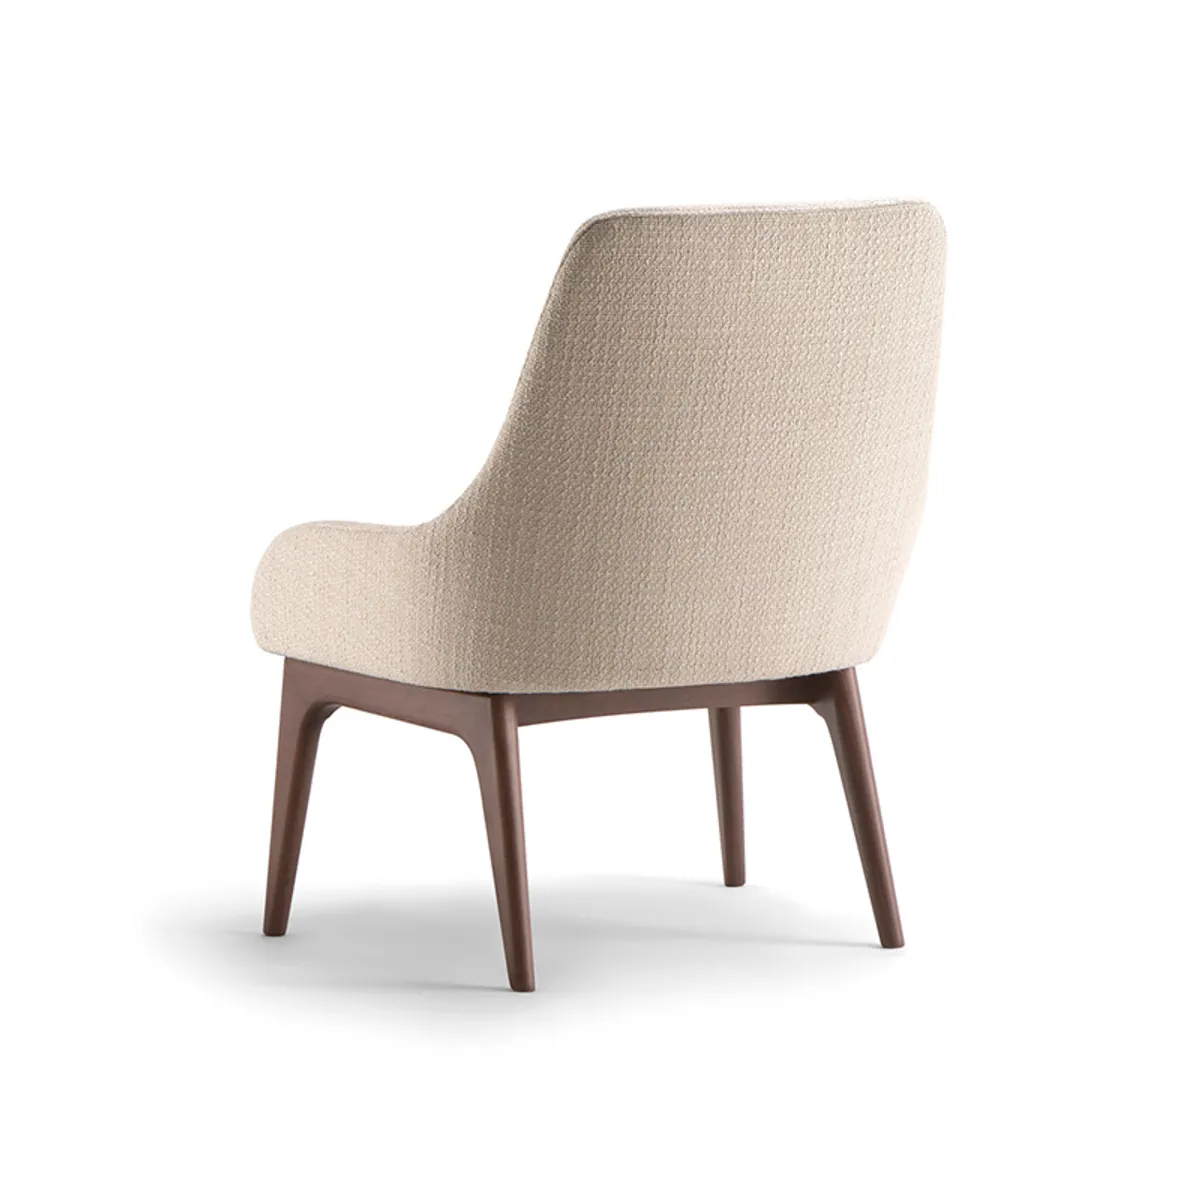 Josie Chair Upholstered Hotel Furniture By Insideoutcontracts